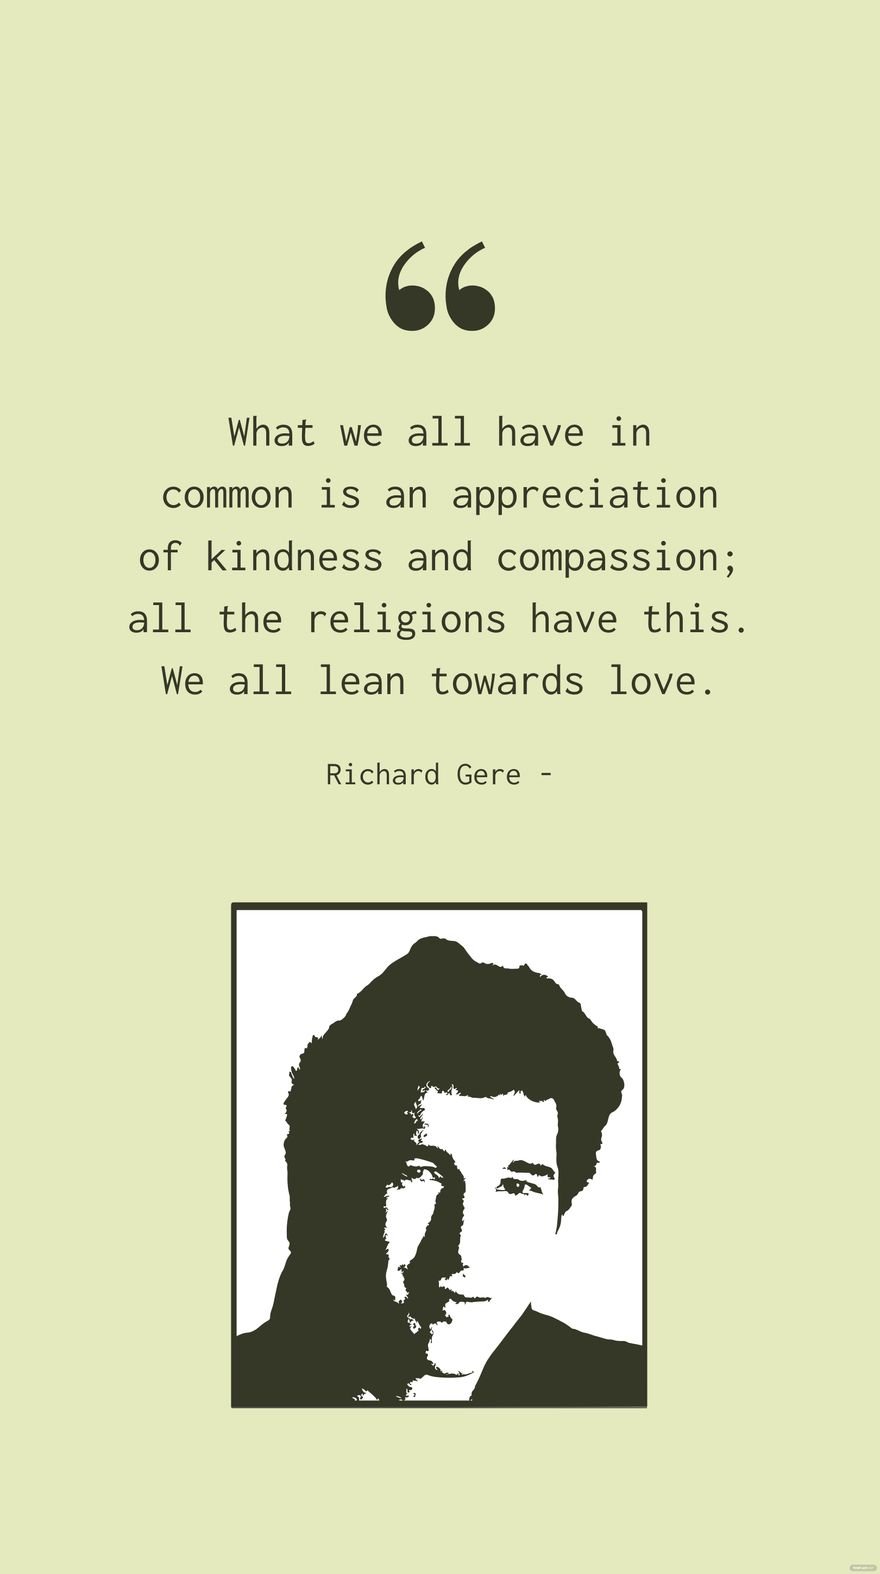 Richard Gere - What we all have in common is an appreciation of kindness and compassion; all the religions have this. We all lean towards love.